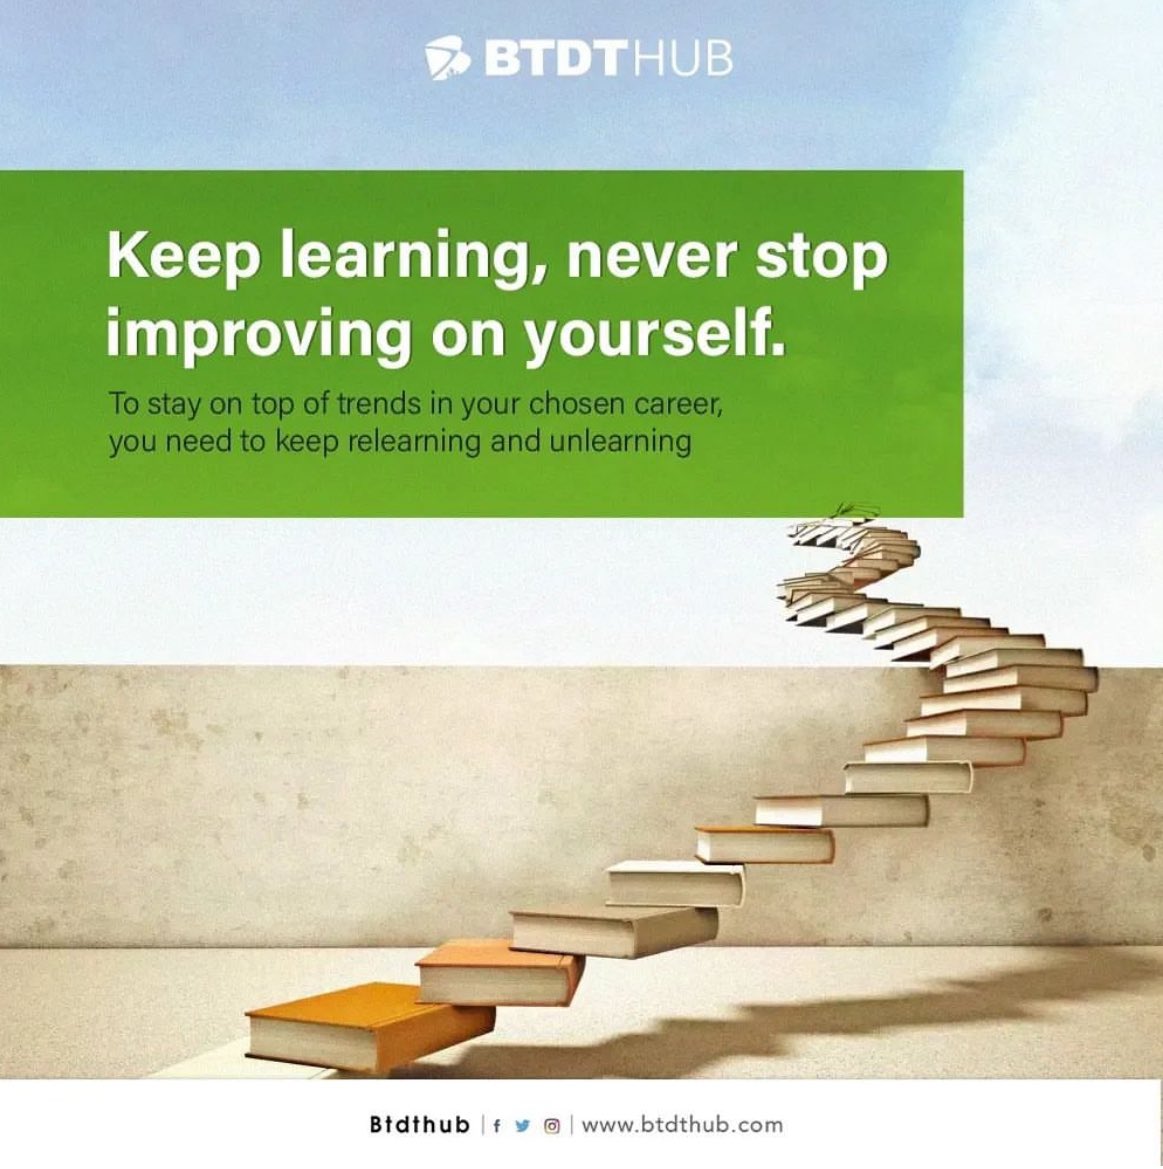 Keep learning. Keep investing in becoming a better YOU. This week is a great time to reflect and commit to personal growth. Don't stop improving on yourself. #MondayMotivation #BTDTHub